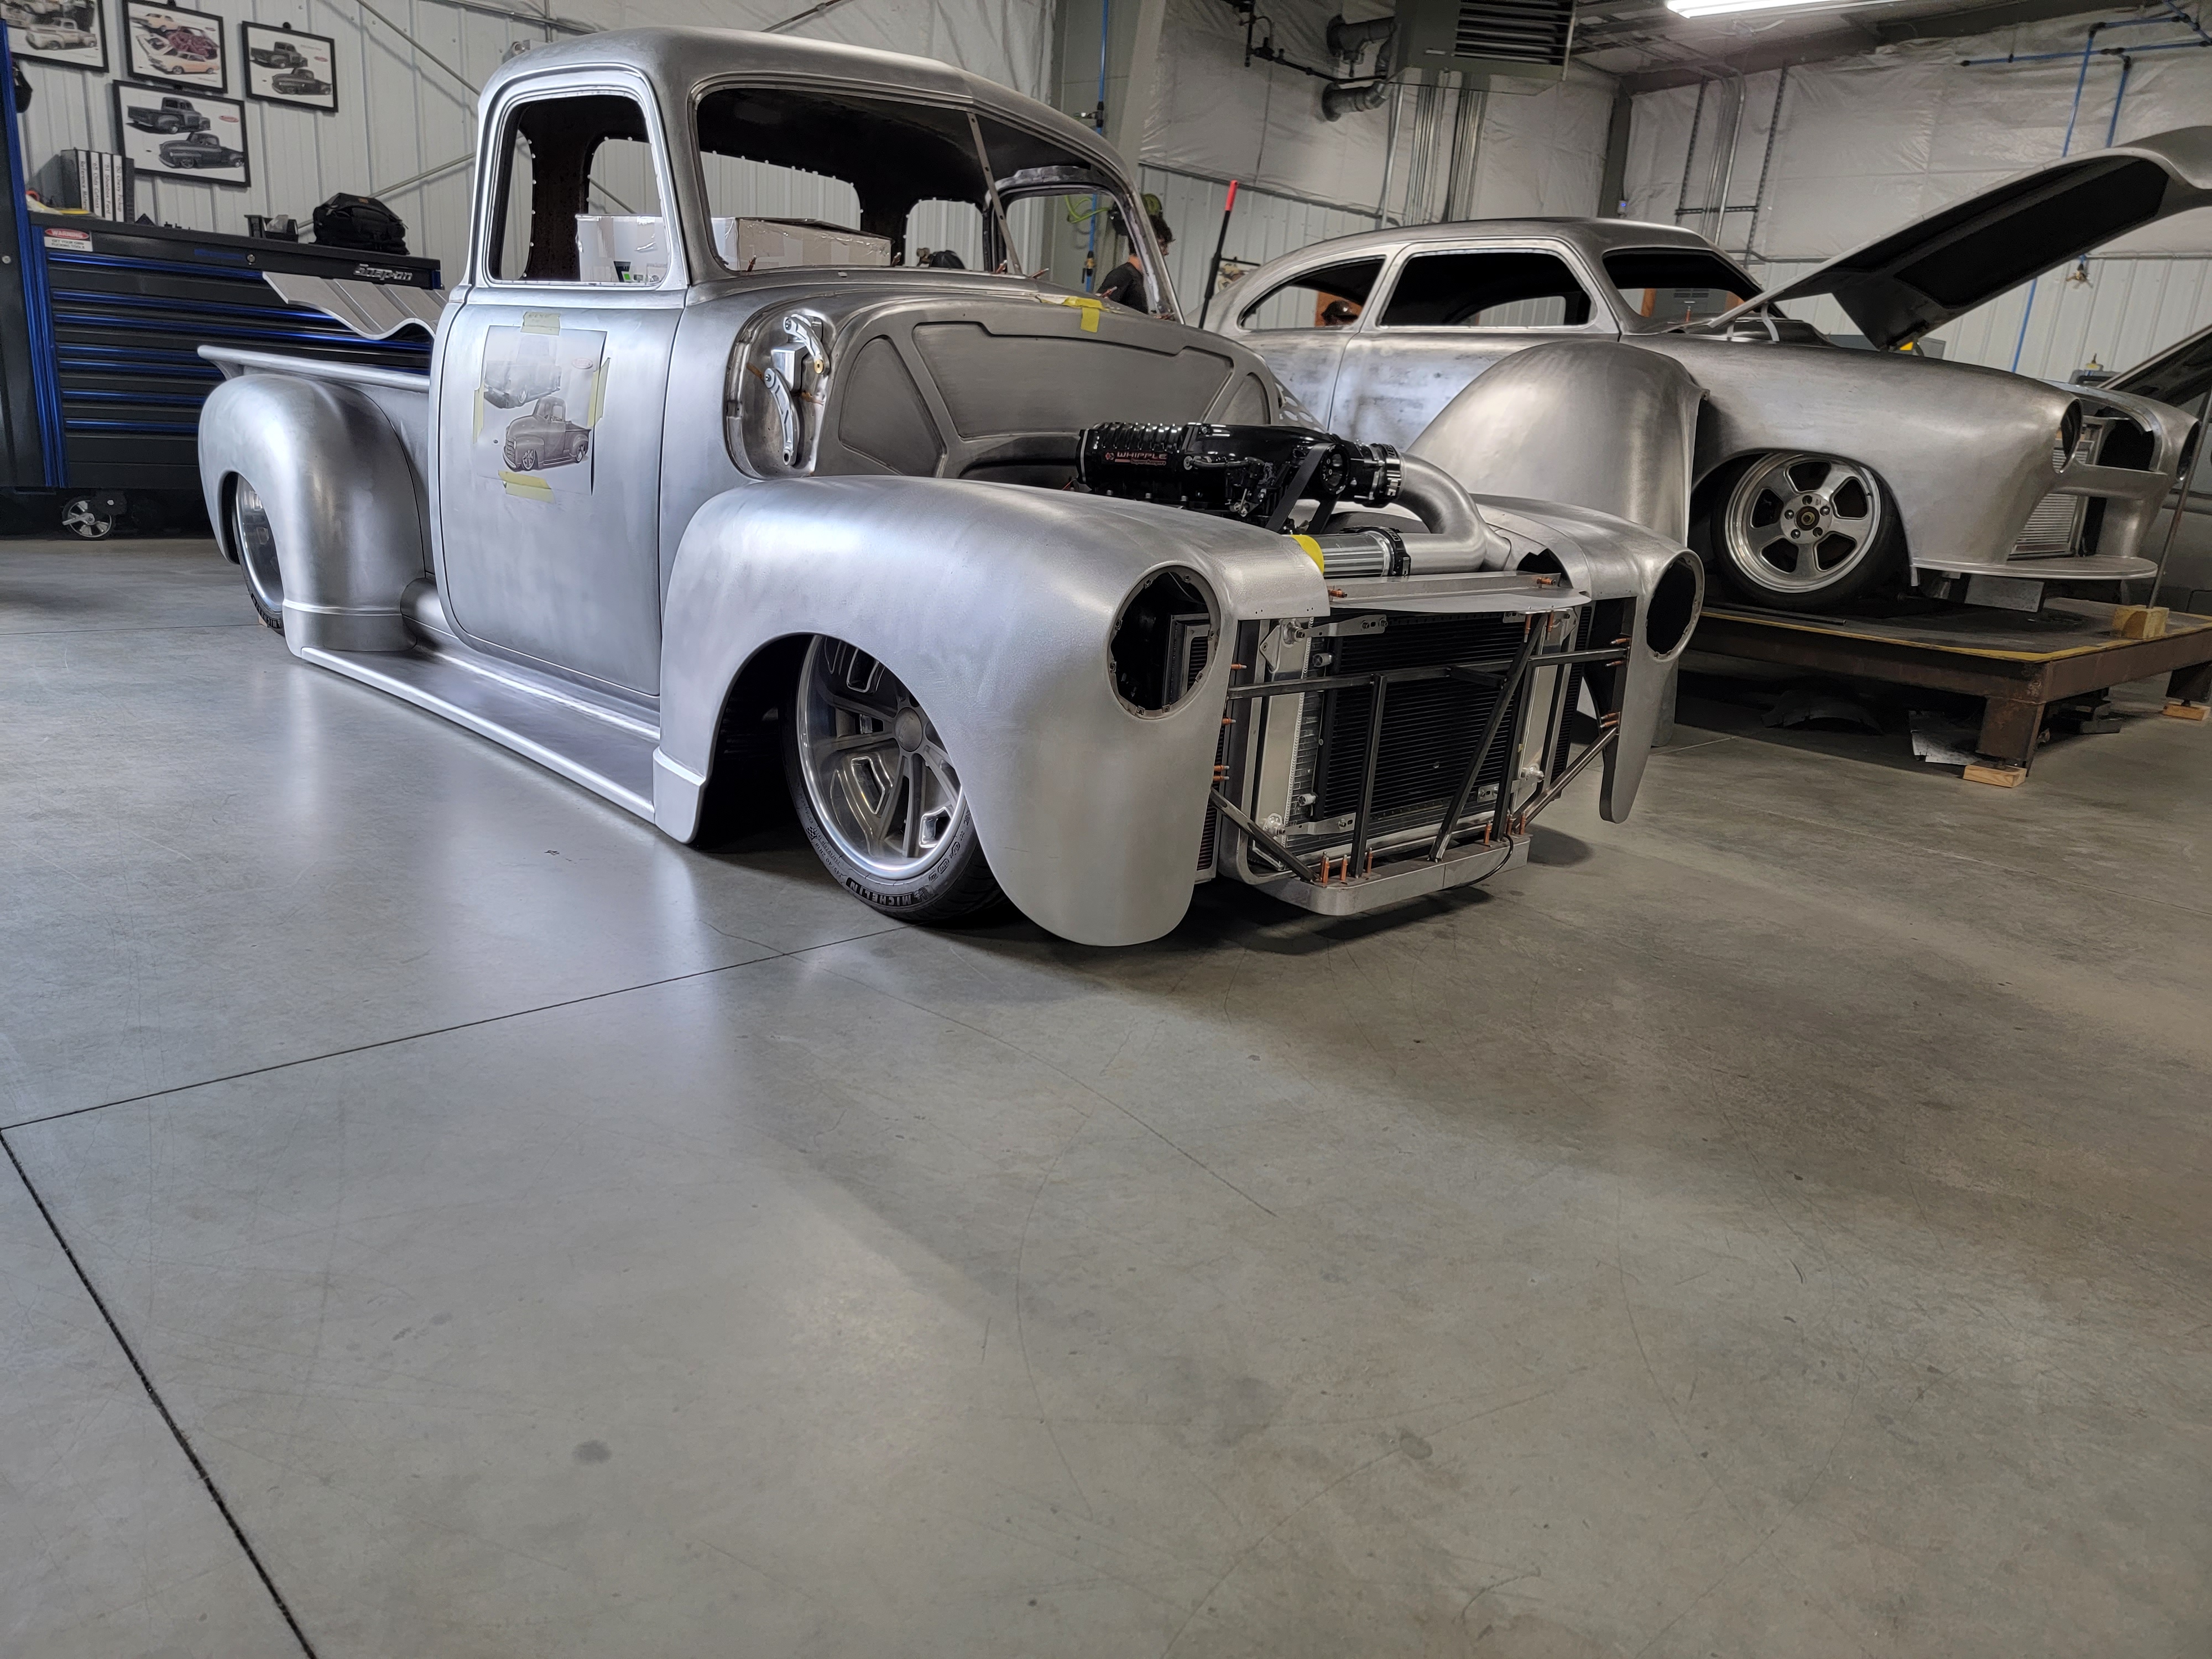 scotts-hotrods-51-chevy-project-truck-3068